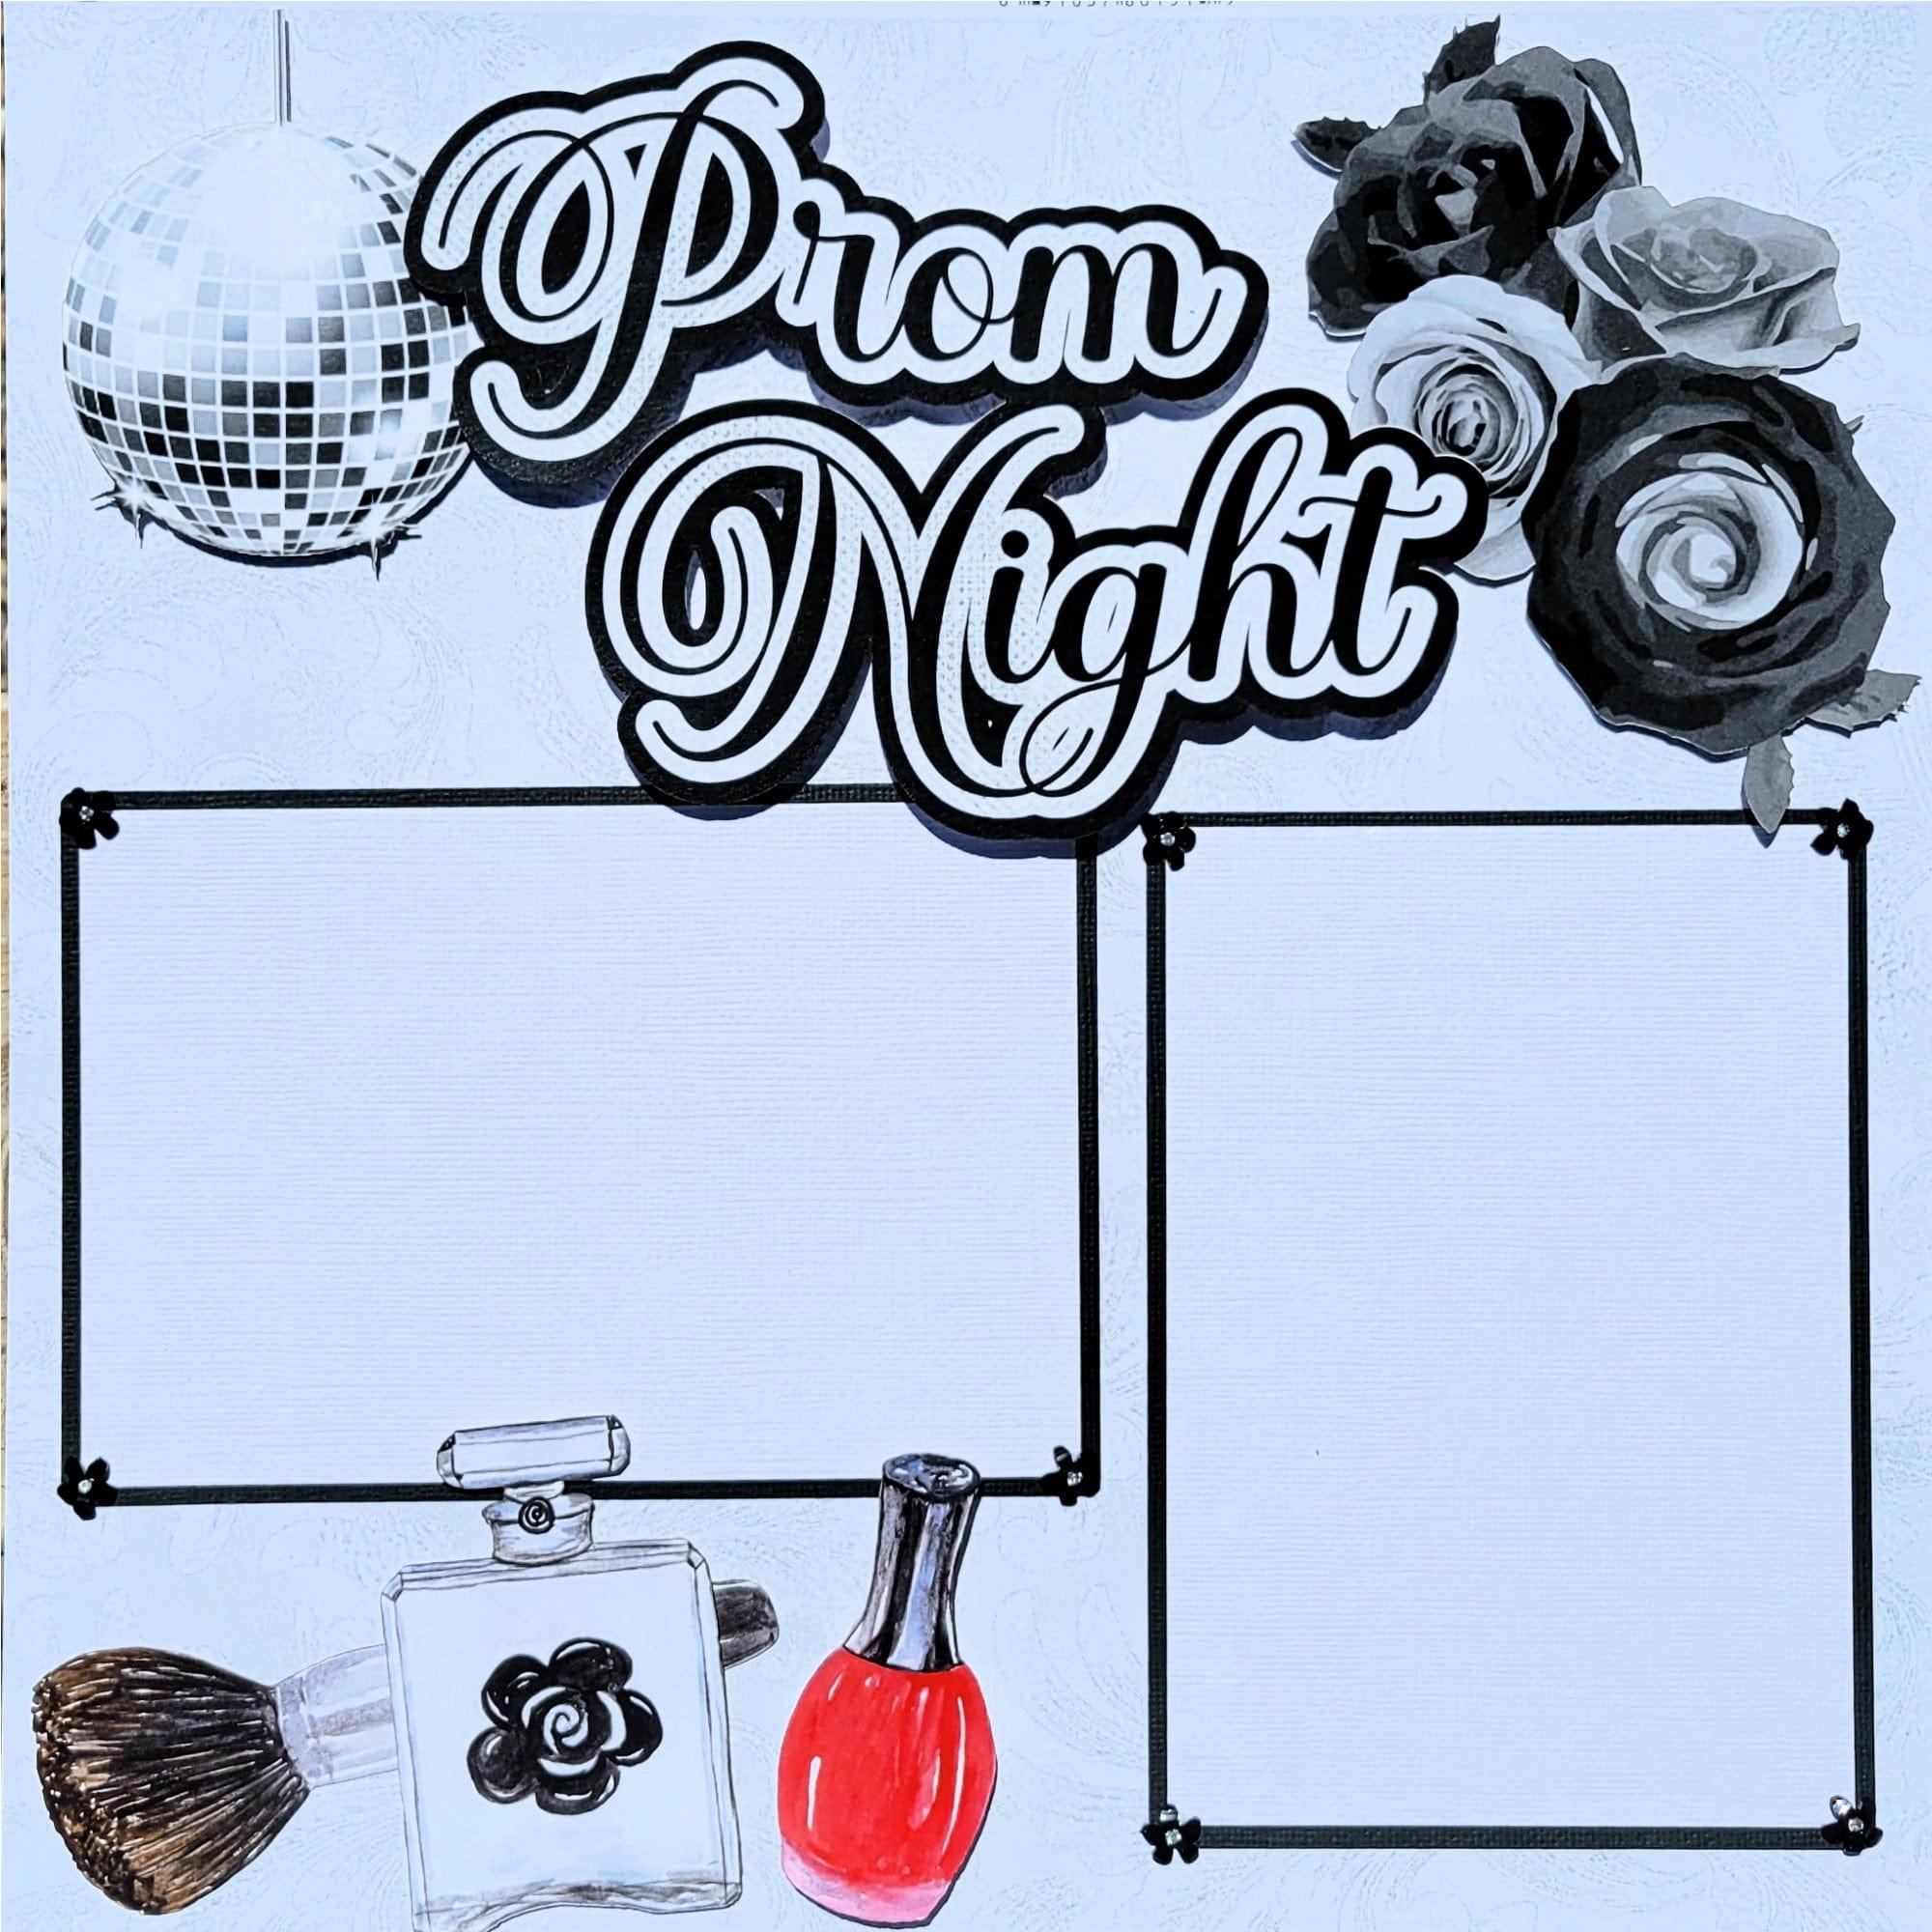 Prom Collection Prom Night (2) - 12 x 12 Pages, Fully-Assembled & Hand-Embellished 3D Scrapbook Premade by SSC Designs